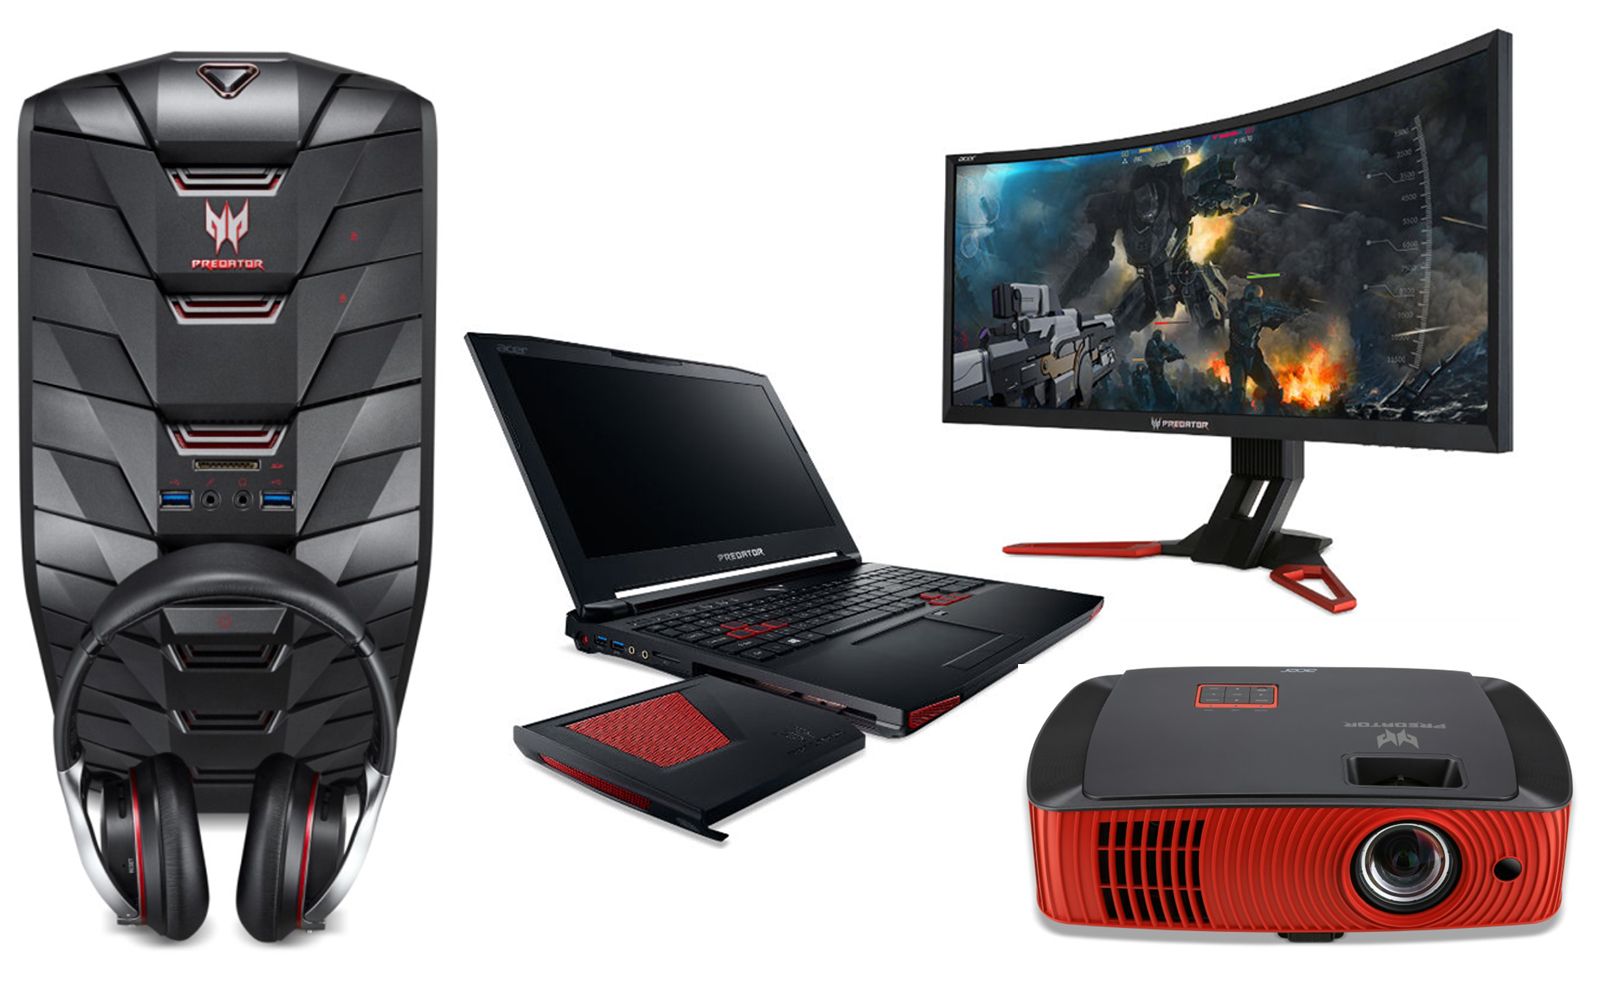 acer predator gaming laptops desktops projector and more hit india image 1